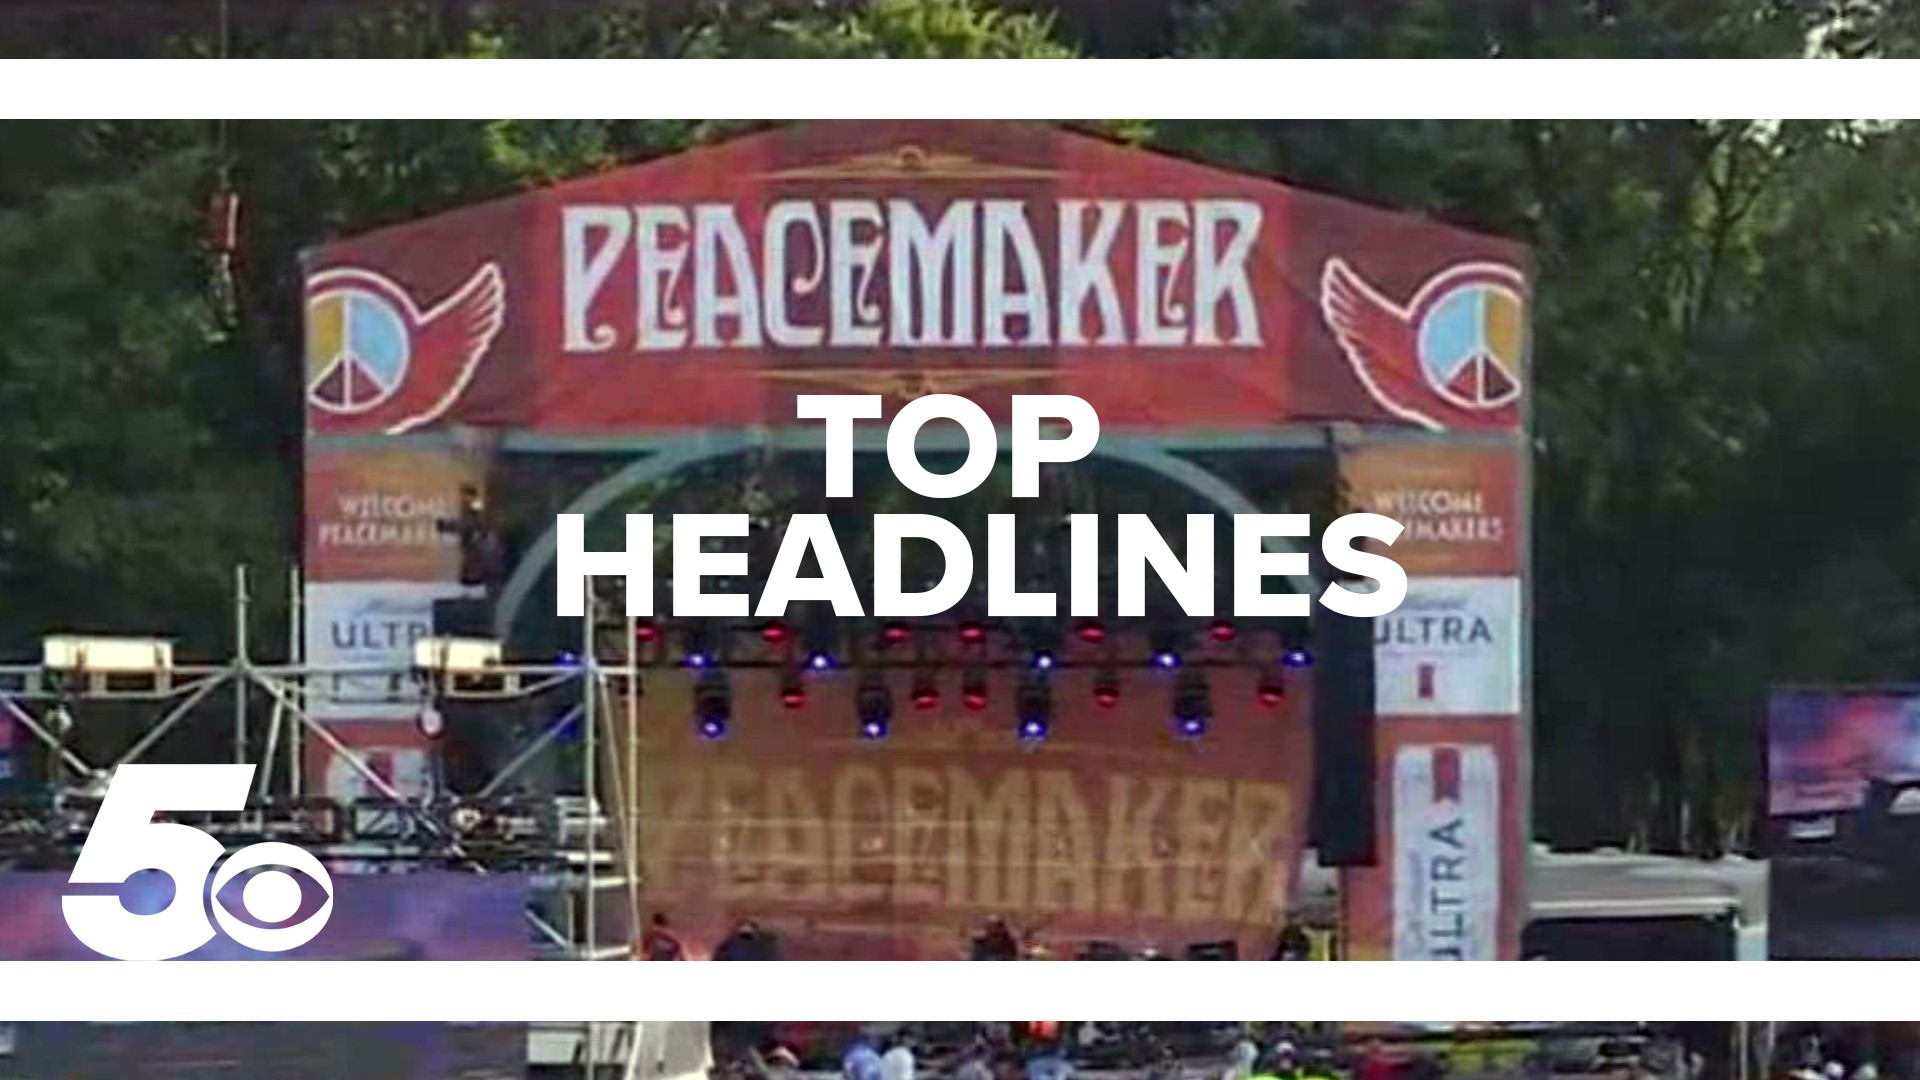 Today's top headlines include a music festival, an office arrested in West Fork, weather, and more.